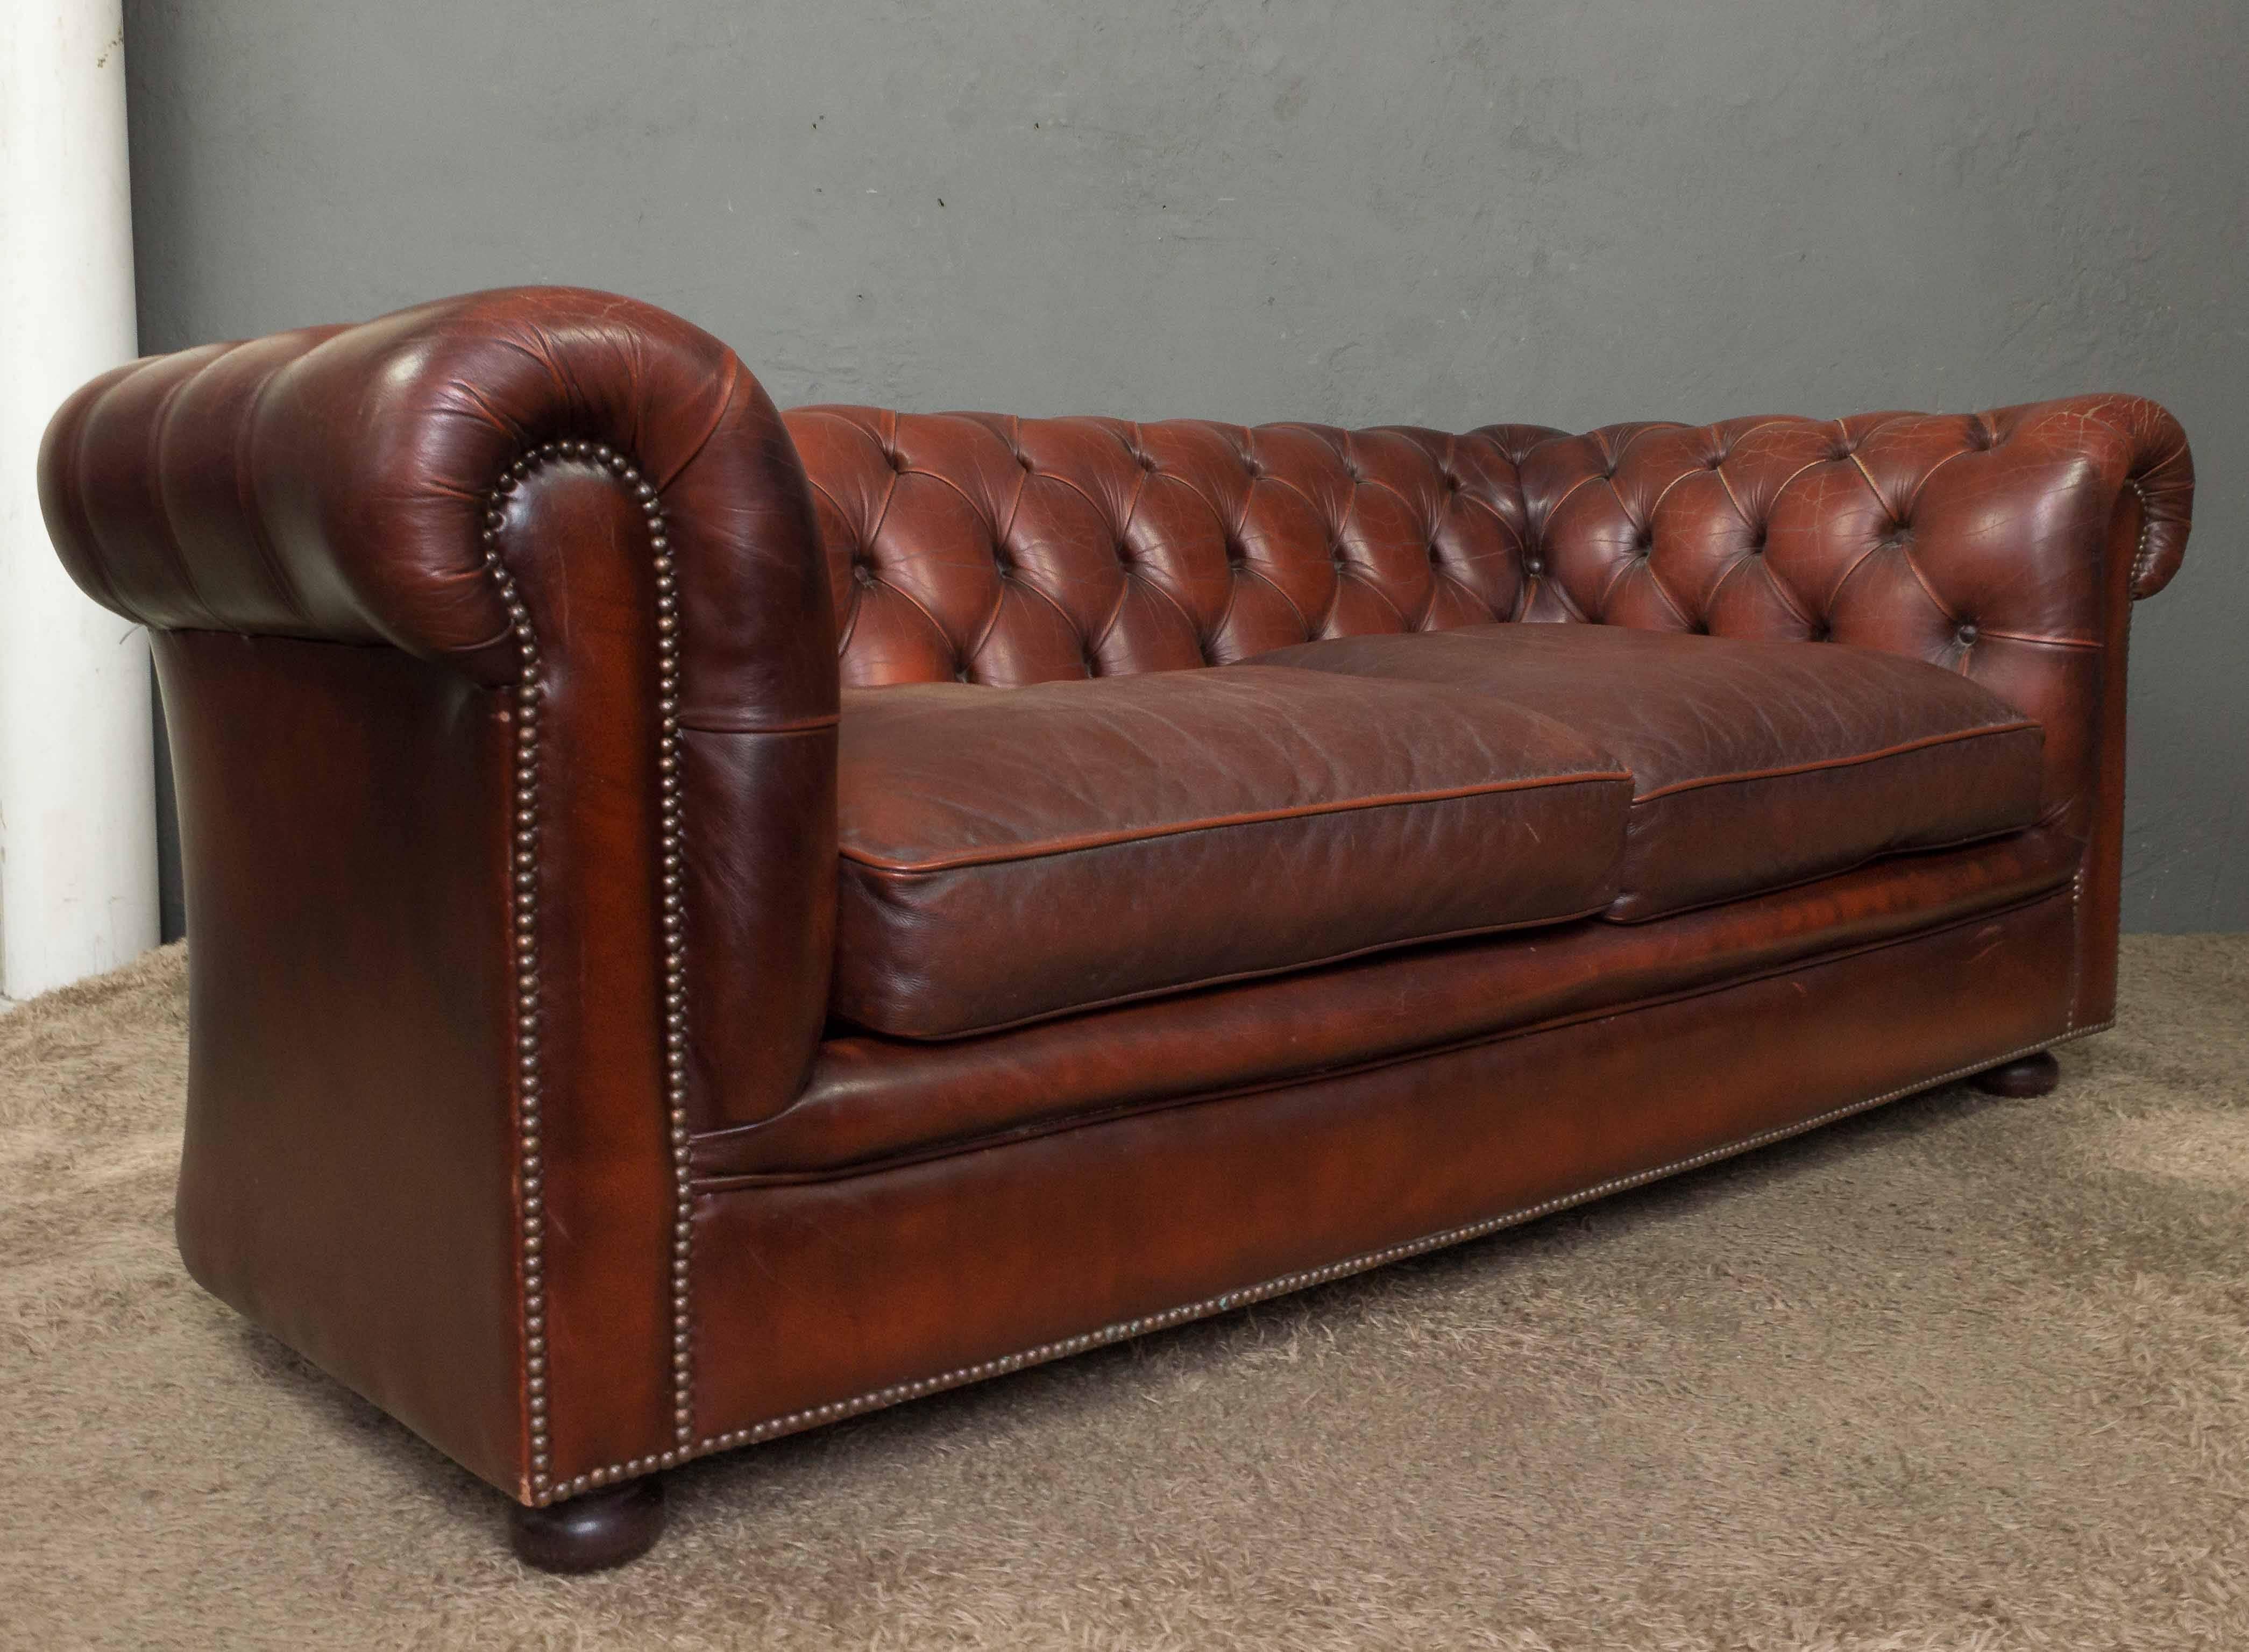 Classic red leather Chesterfield sofa with brass nailheads resting on wood feet. Leather has light cracking visible on arms.
 